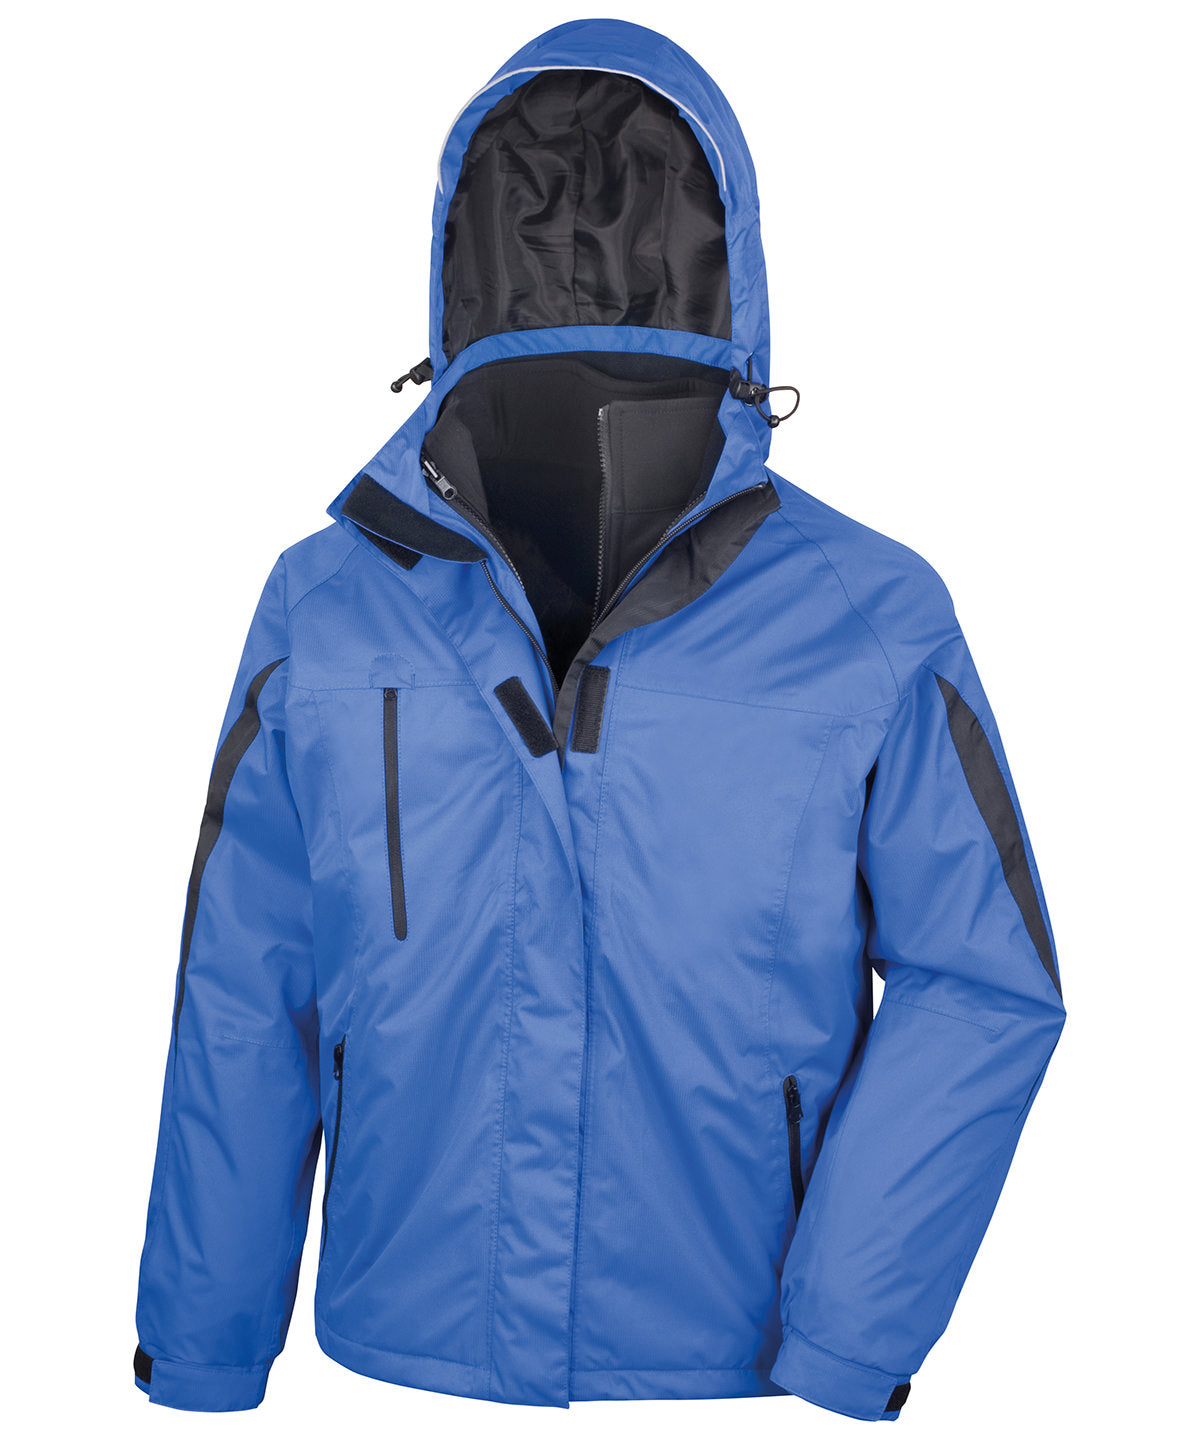 3-in-1 journey jacket with softshell inner